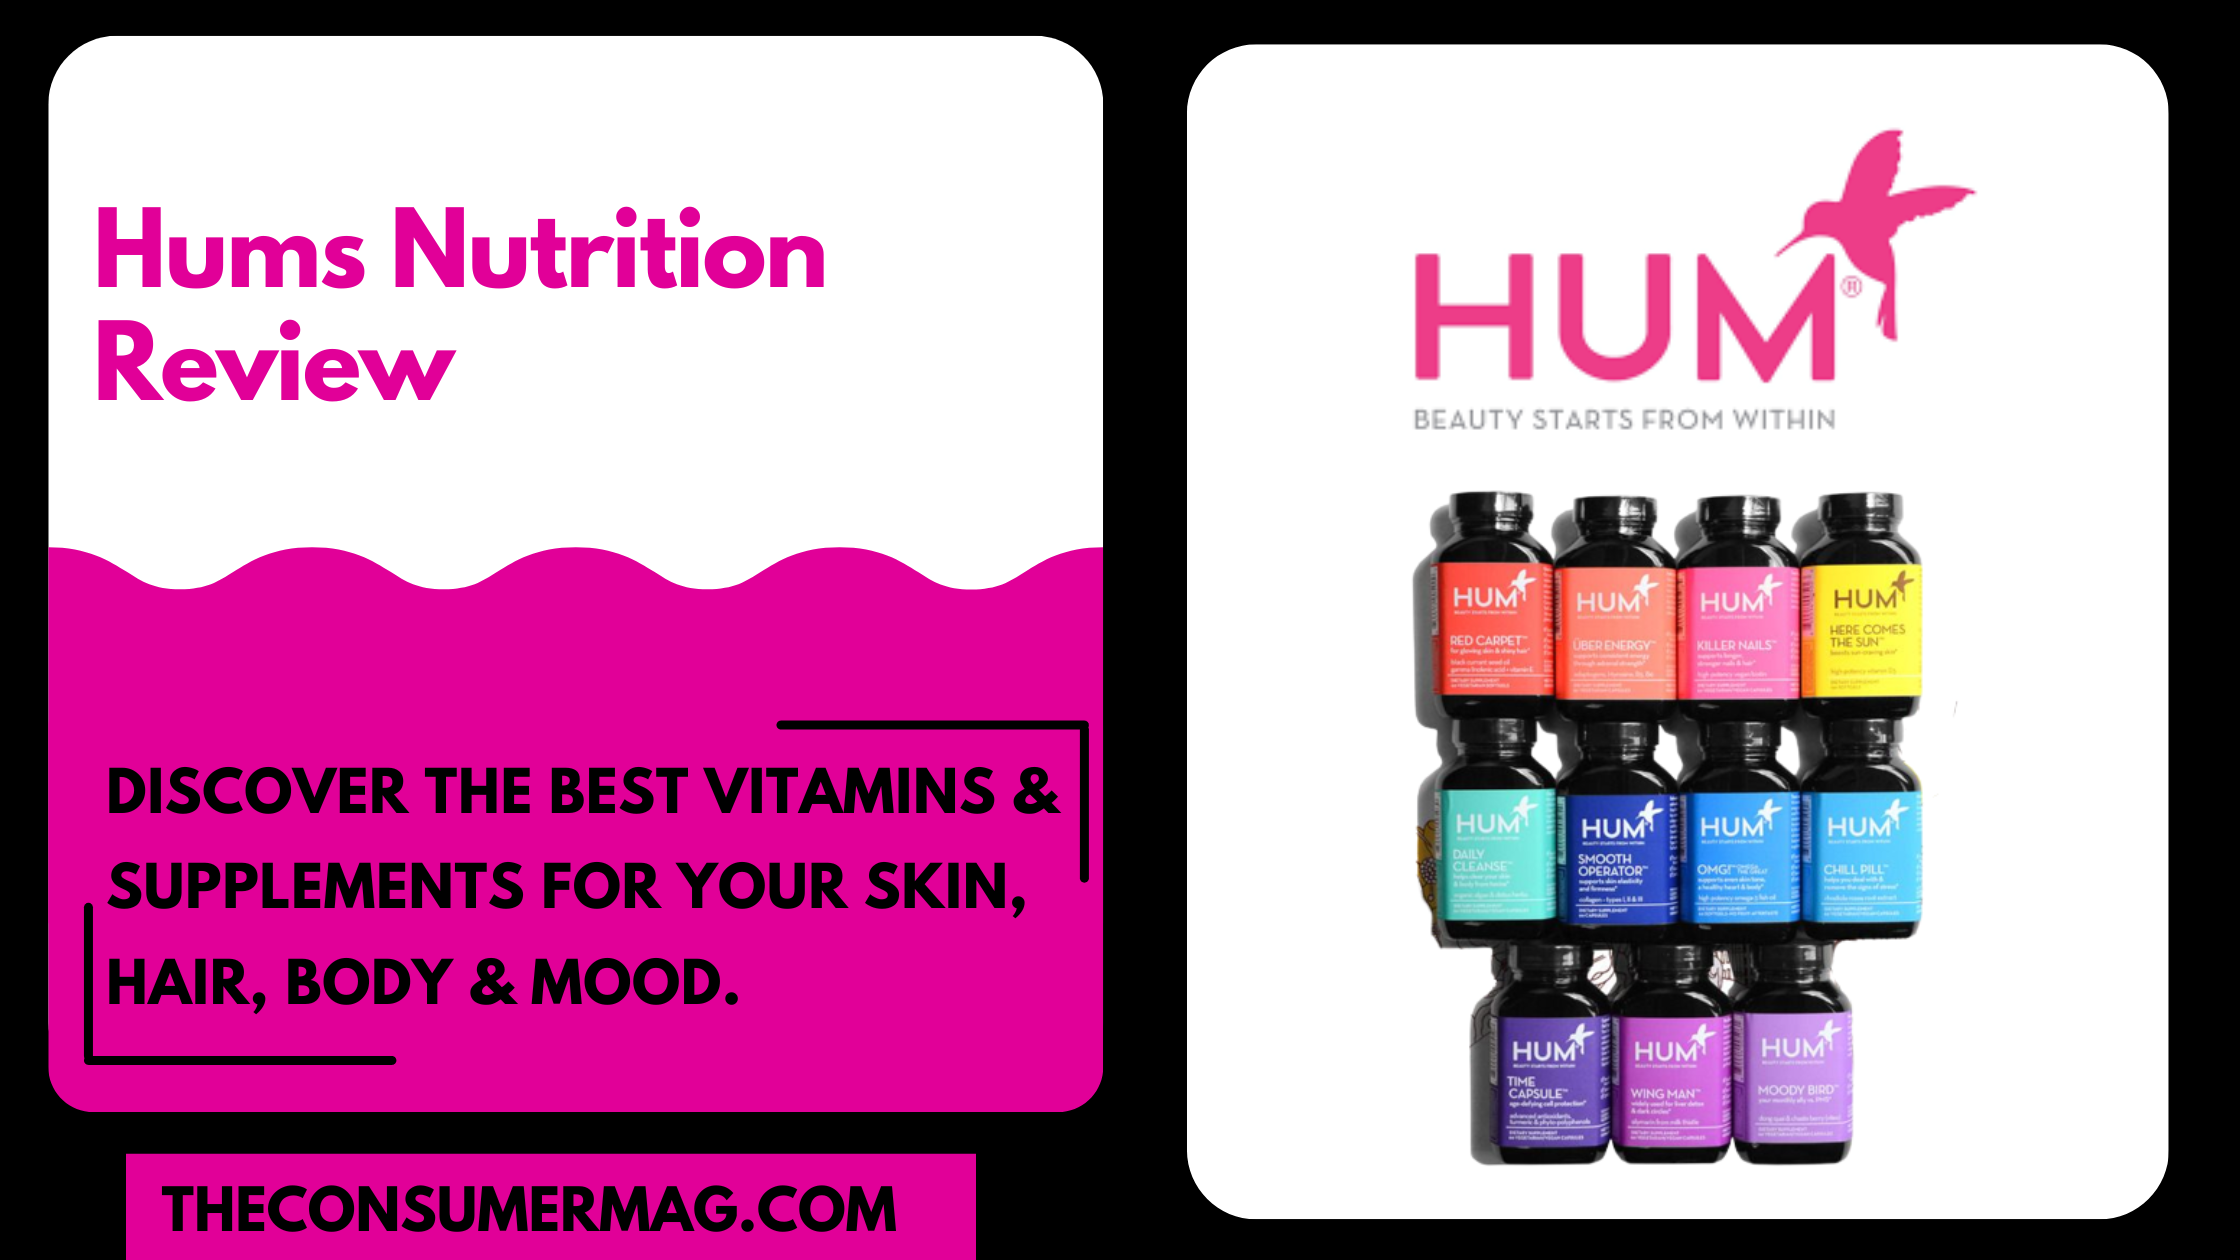 Hum Nutrition featured image